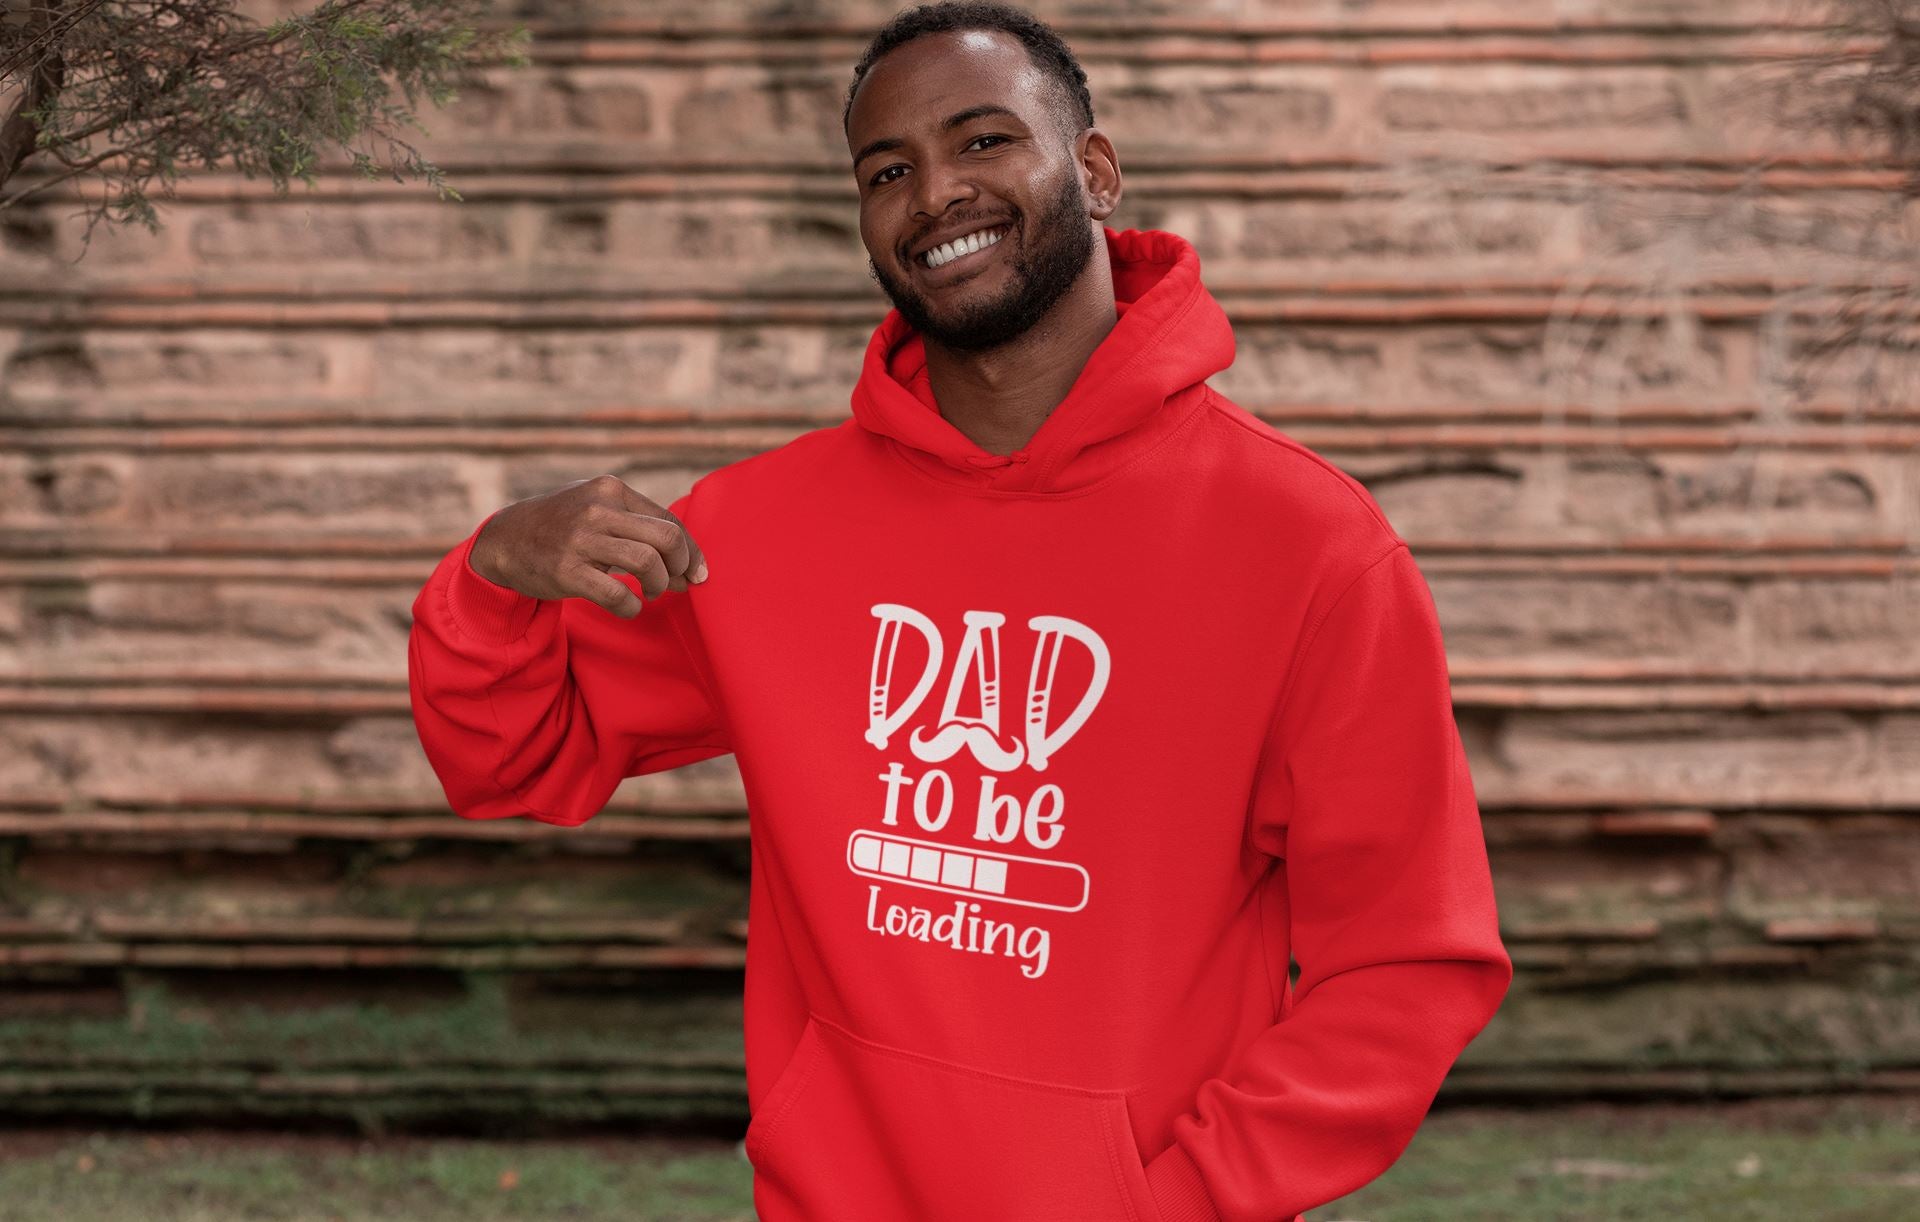 Dad to be Loading Hoody